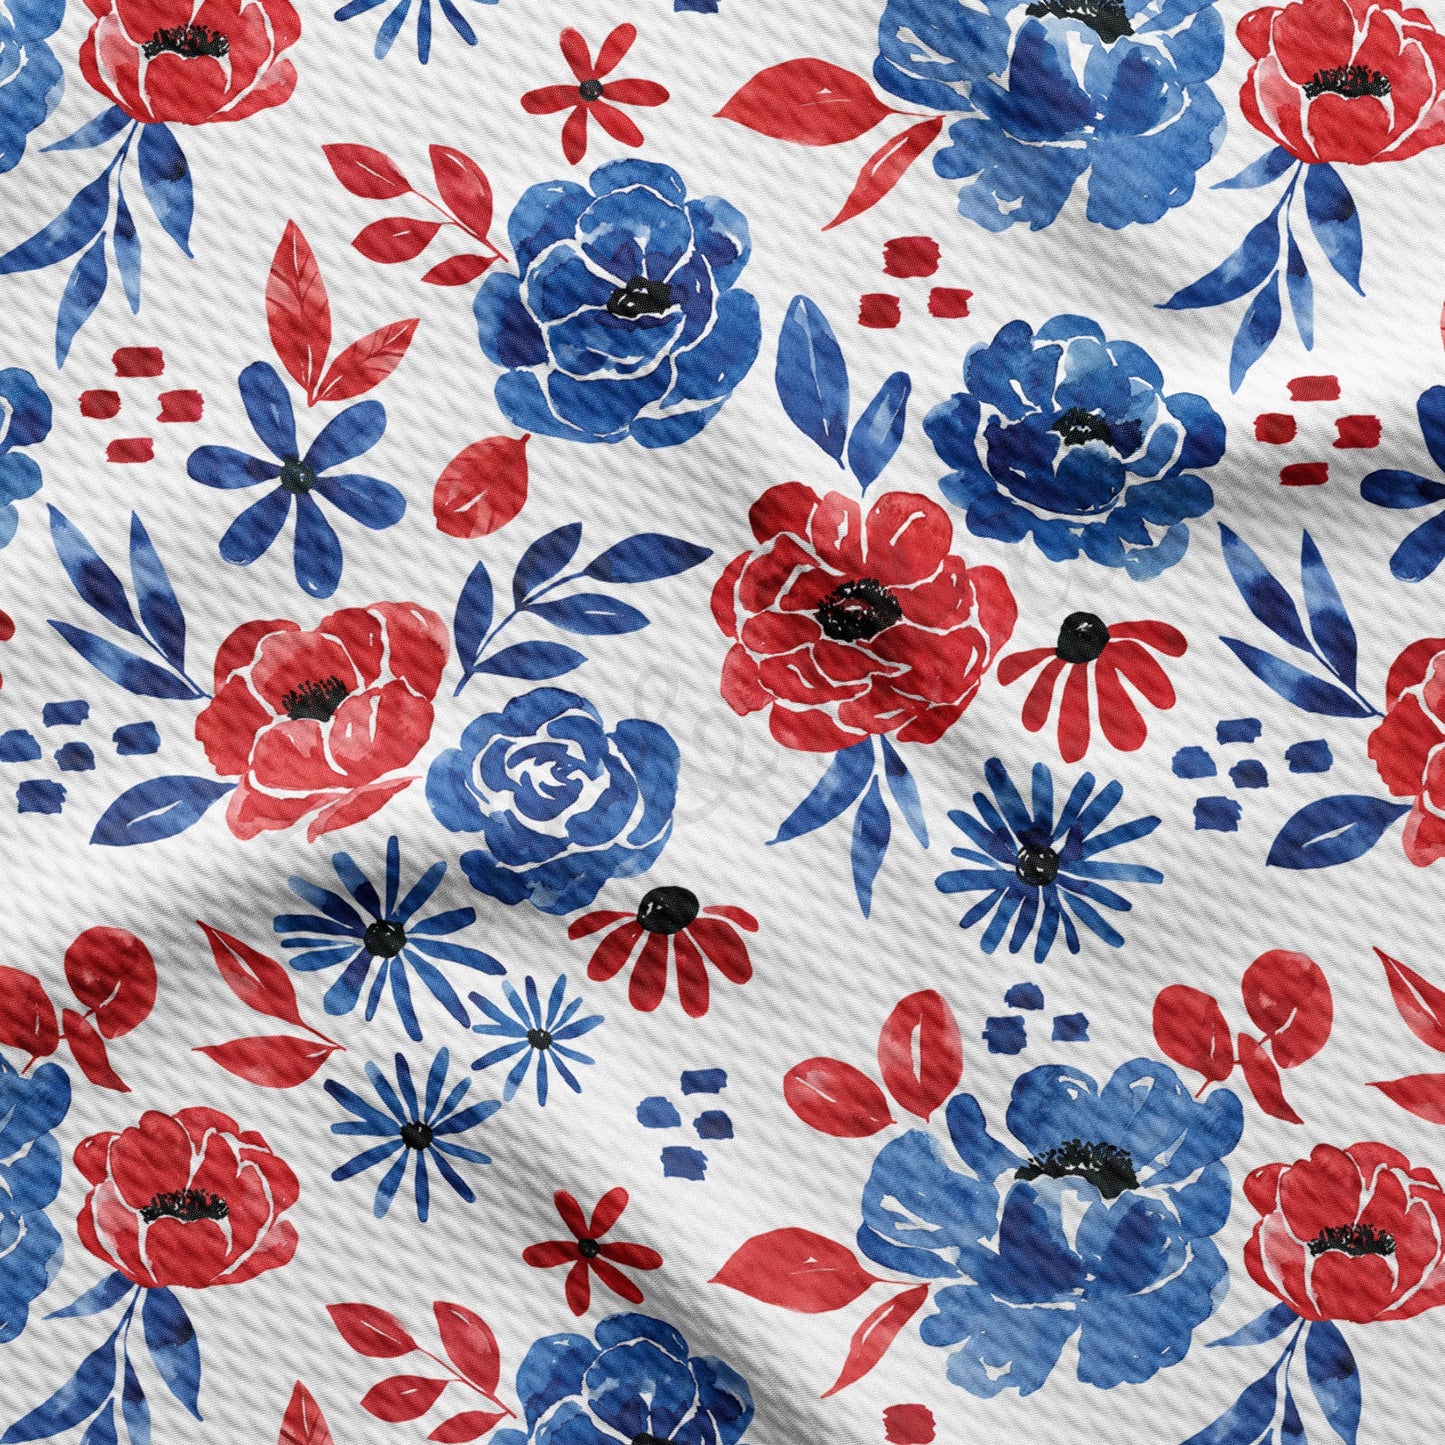 Patriotic 4th of July  Bullet Textured Fabric by the yard AA1609